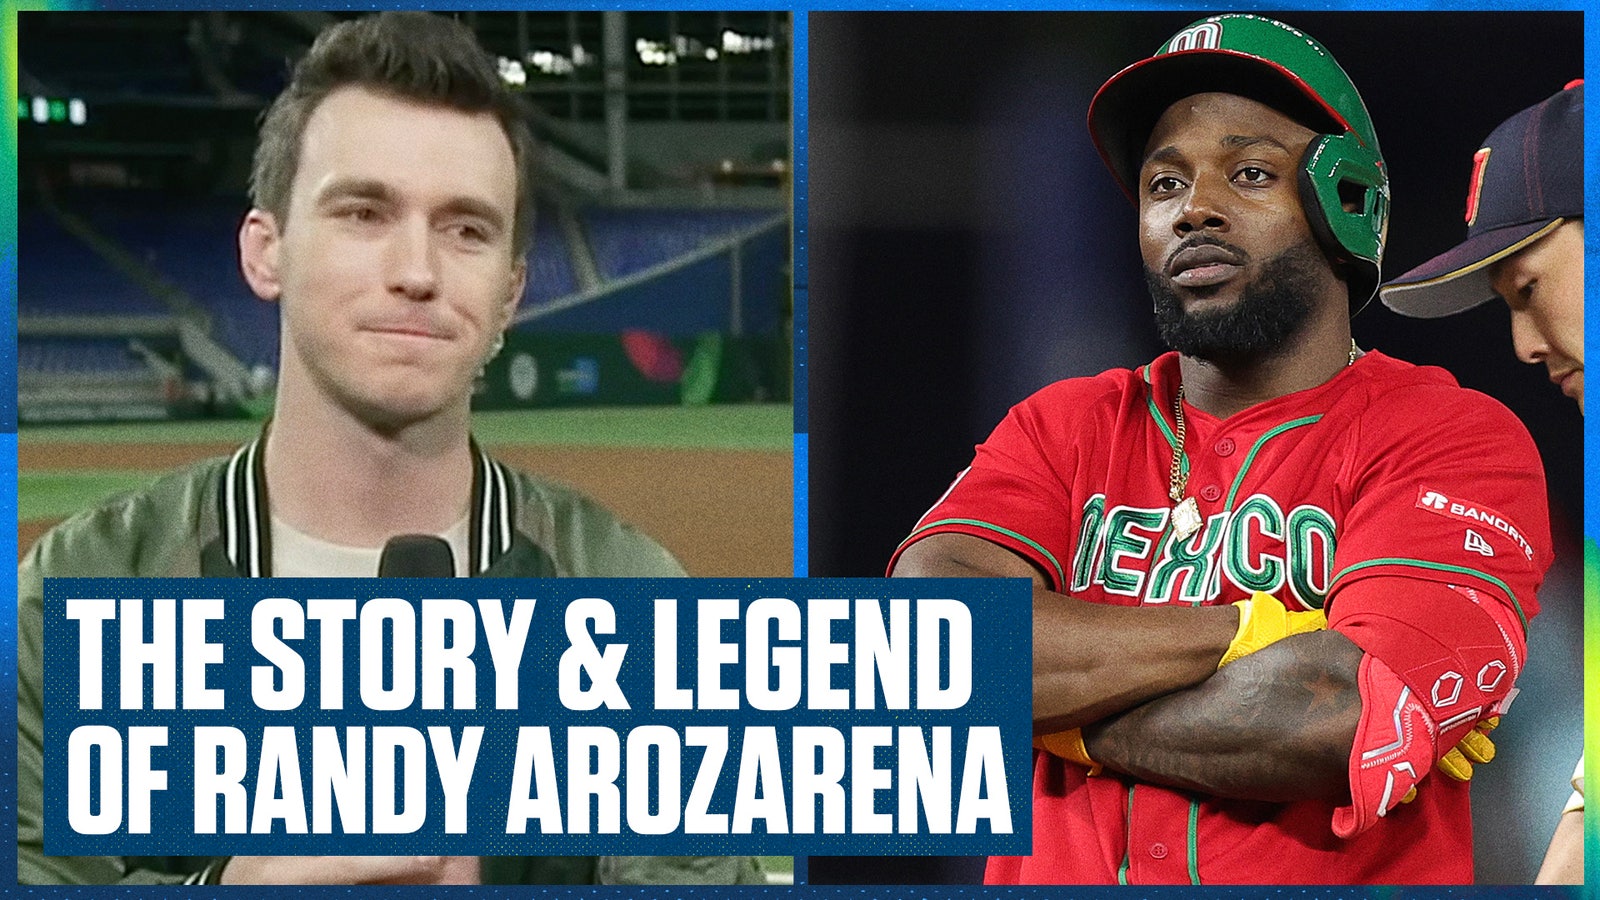 Randy Arozarena was the WBC player, but his story is even better